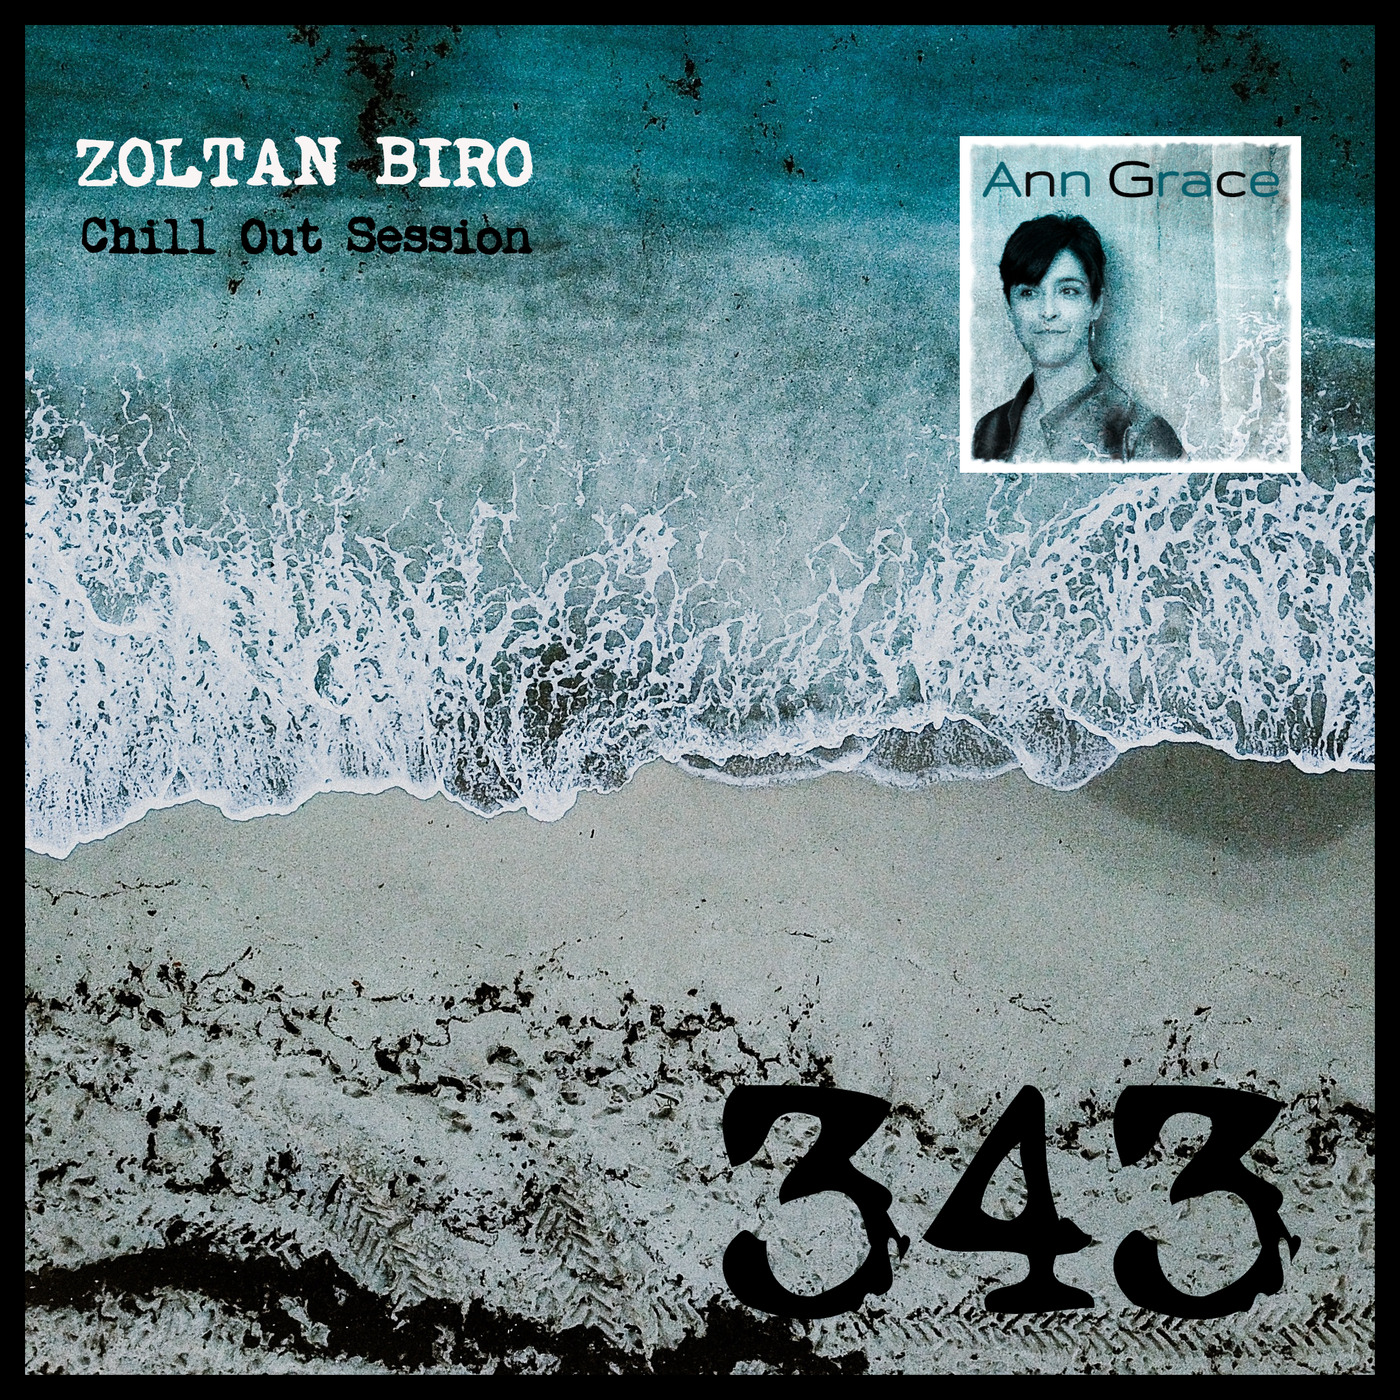 Zoltan Biro - Chill Out Session 343 [including: Ann Grace Special Mix]